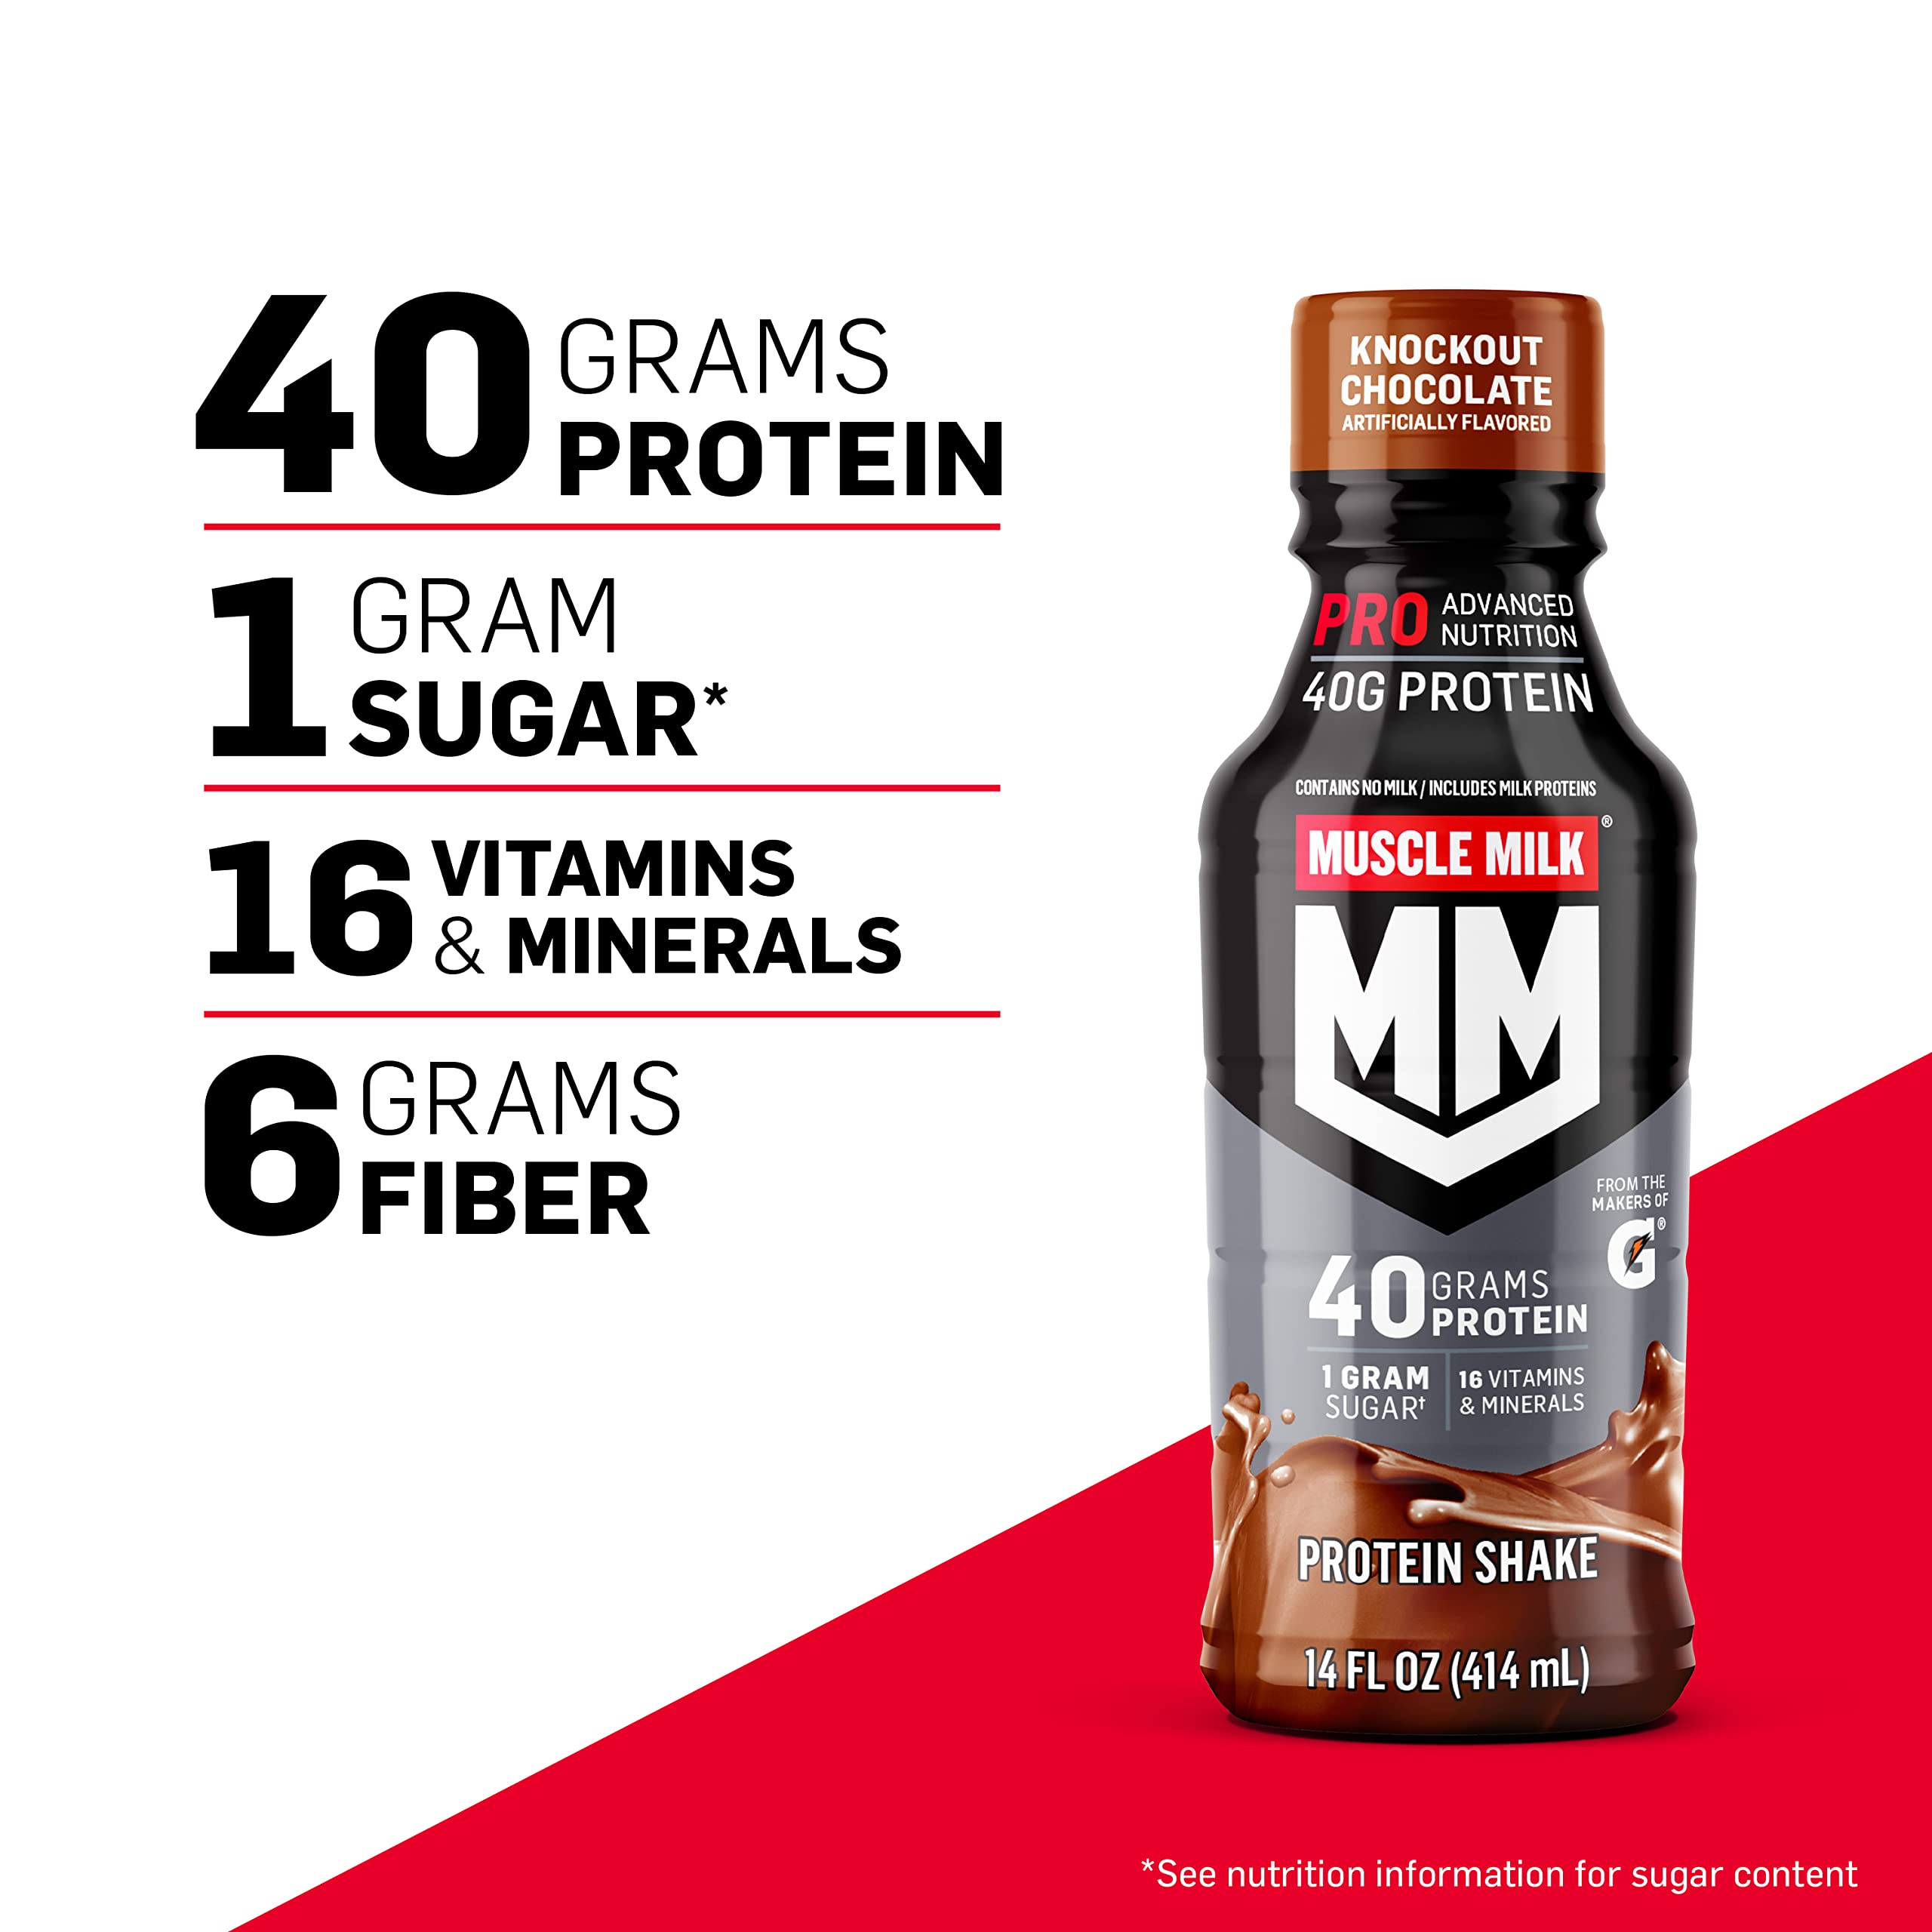 Muscle Milk Pro Advanced Nutrition Protein Shake, Slammin' Strawberry, 14 Fl Oz Bottle, 12 Pack, 40g Protein, 1g Sugar, 16 Vitamins & Minerals, 6g Fiber, Workout Recovery, Packaging May Vary